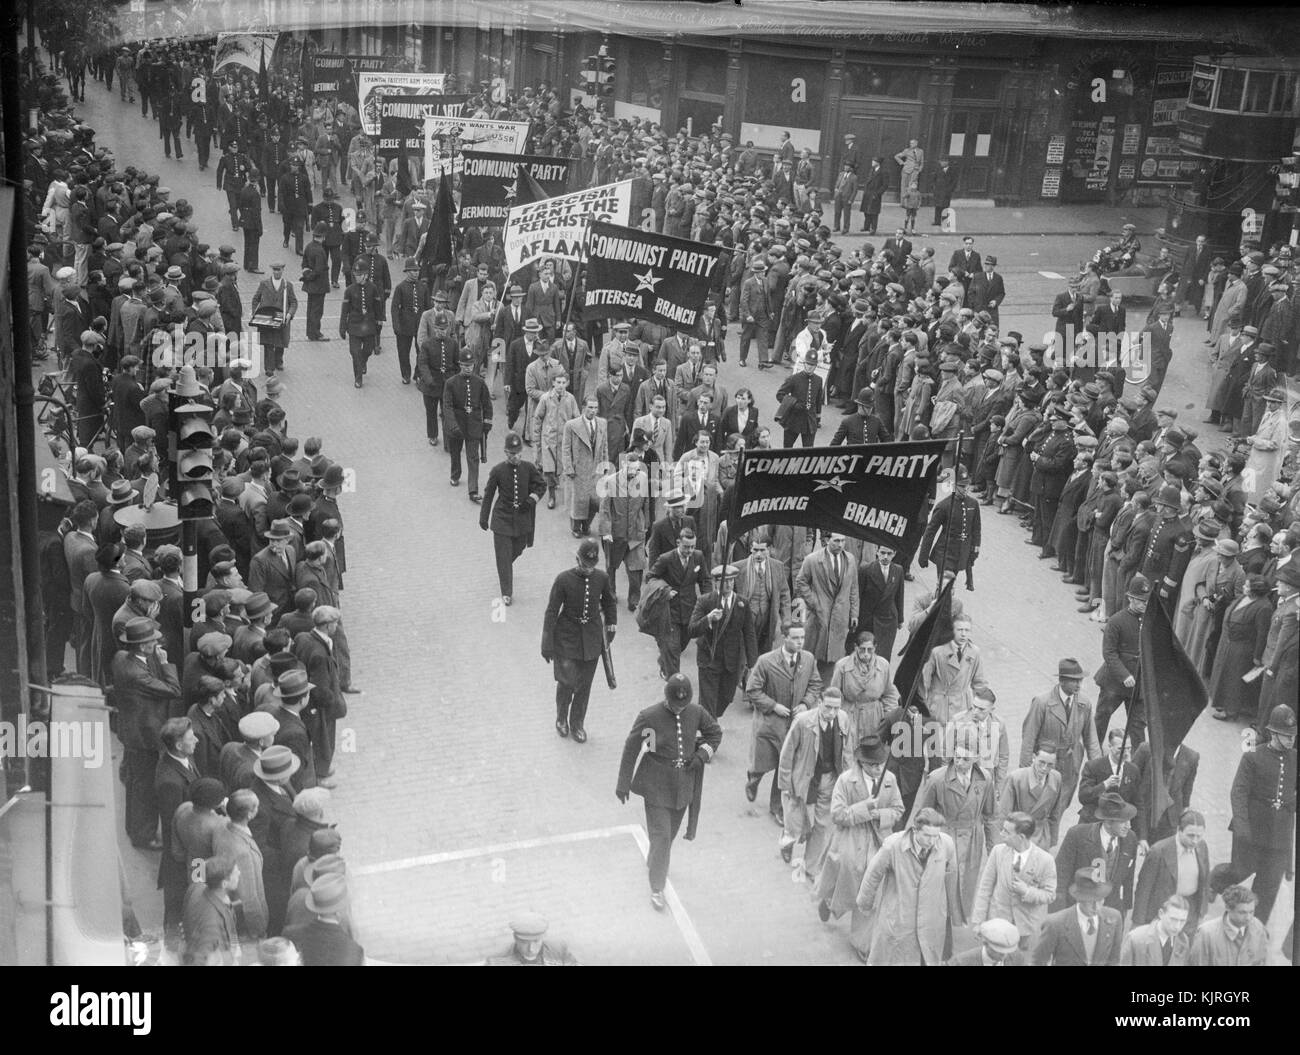 Image showing the anti-fascist demonstration in London on 4th October 1936 that became known as 'The Battle Of Cable Street'.The Battle of Cable Street was a riot that took place on in Cable Street in the East End of London. It was a clash between the Metropolitan Police, sent to protect a march by members of the British Union of Fascists, led by Oswald Mosley, and various anti-fascist demonstrators, including local anarchist, communist, Irish, Jewish and socialist groups. The majority of both marchers and counter-protesters travelled into the area for this purpose. Stock Photo